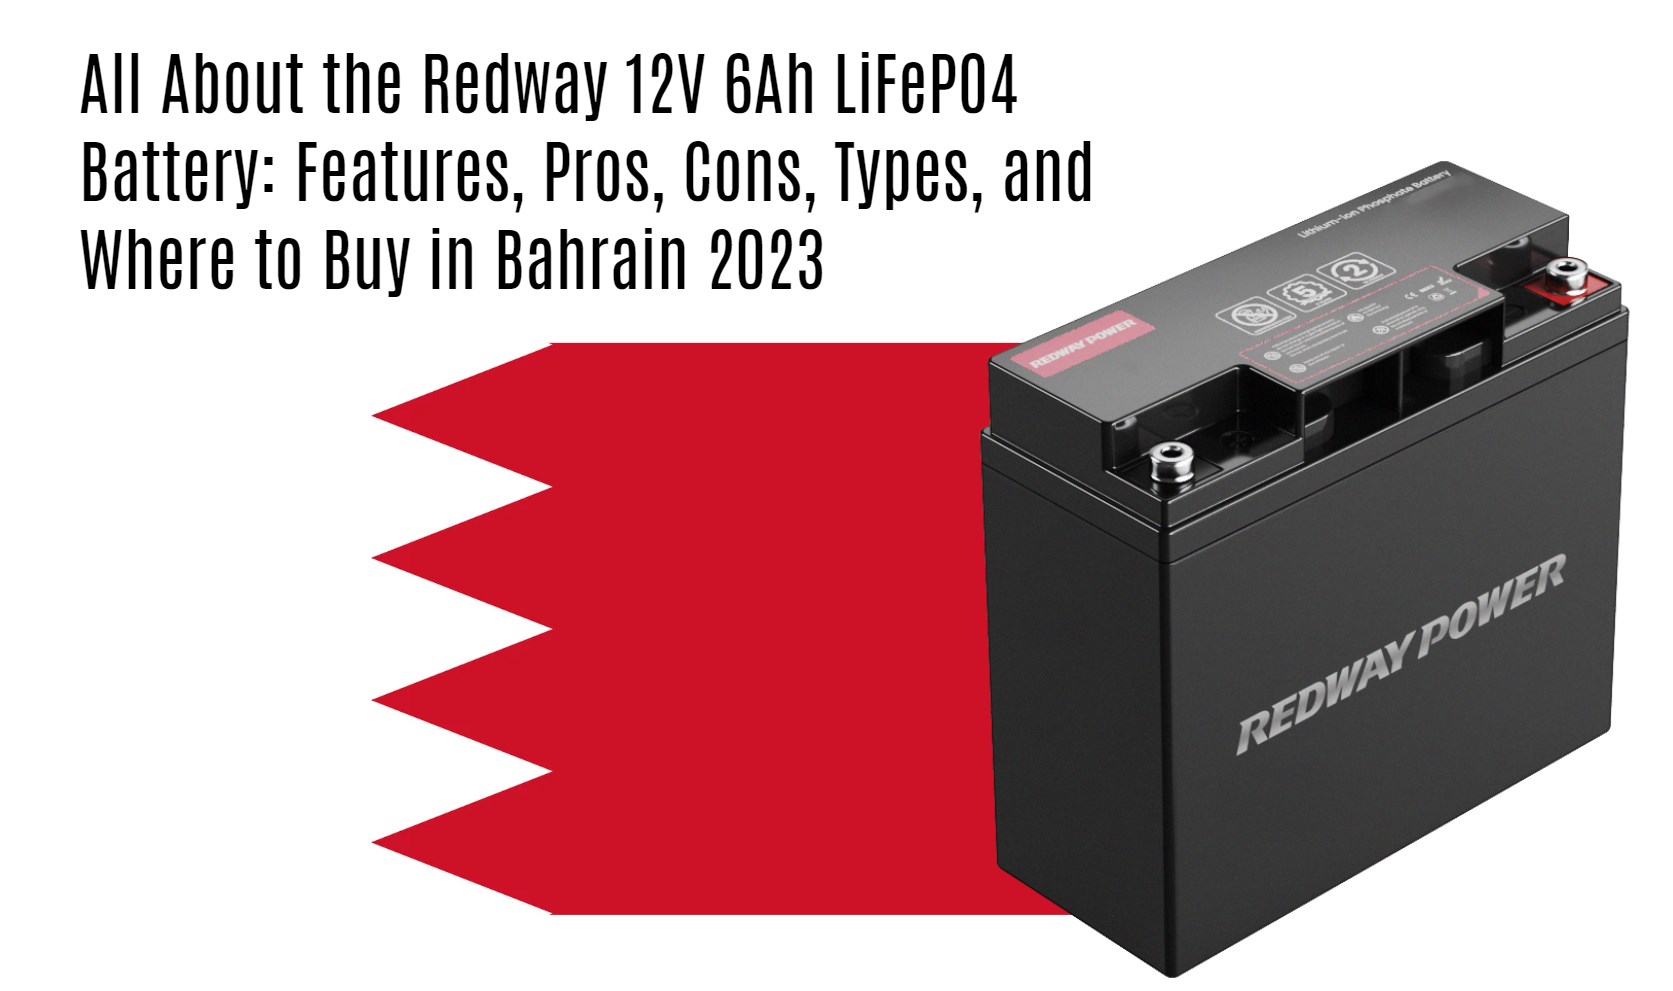 All About the Redway 12V 6Ah LiFePO4 Battery: Features, Pros, Cons, Types, and Where to Buy in Bahrain 2023